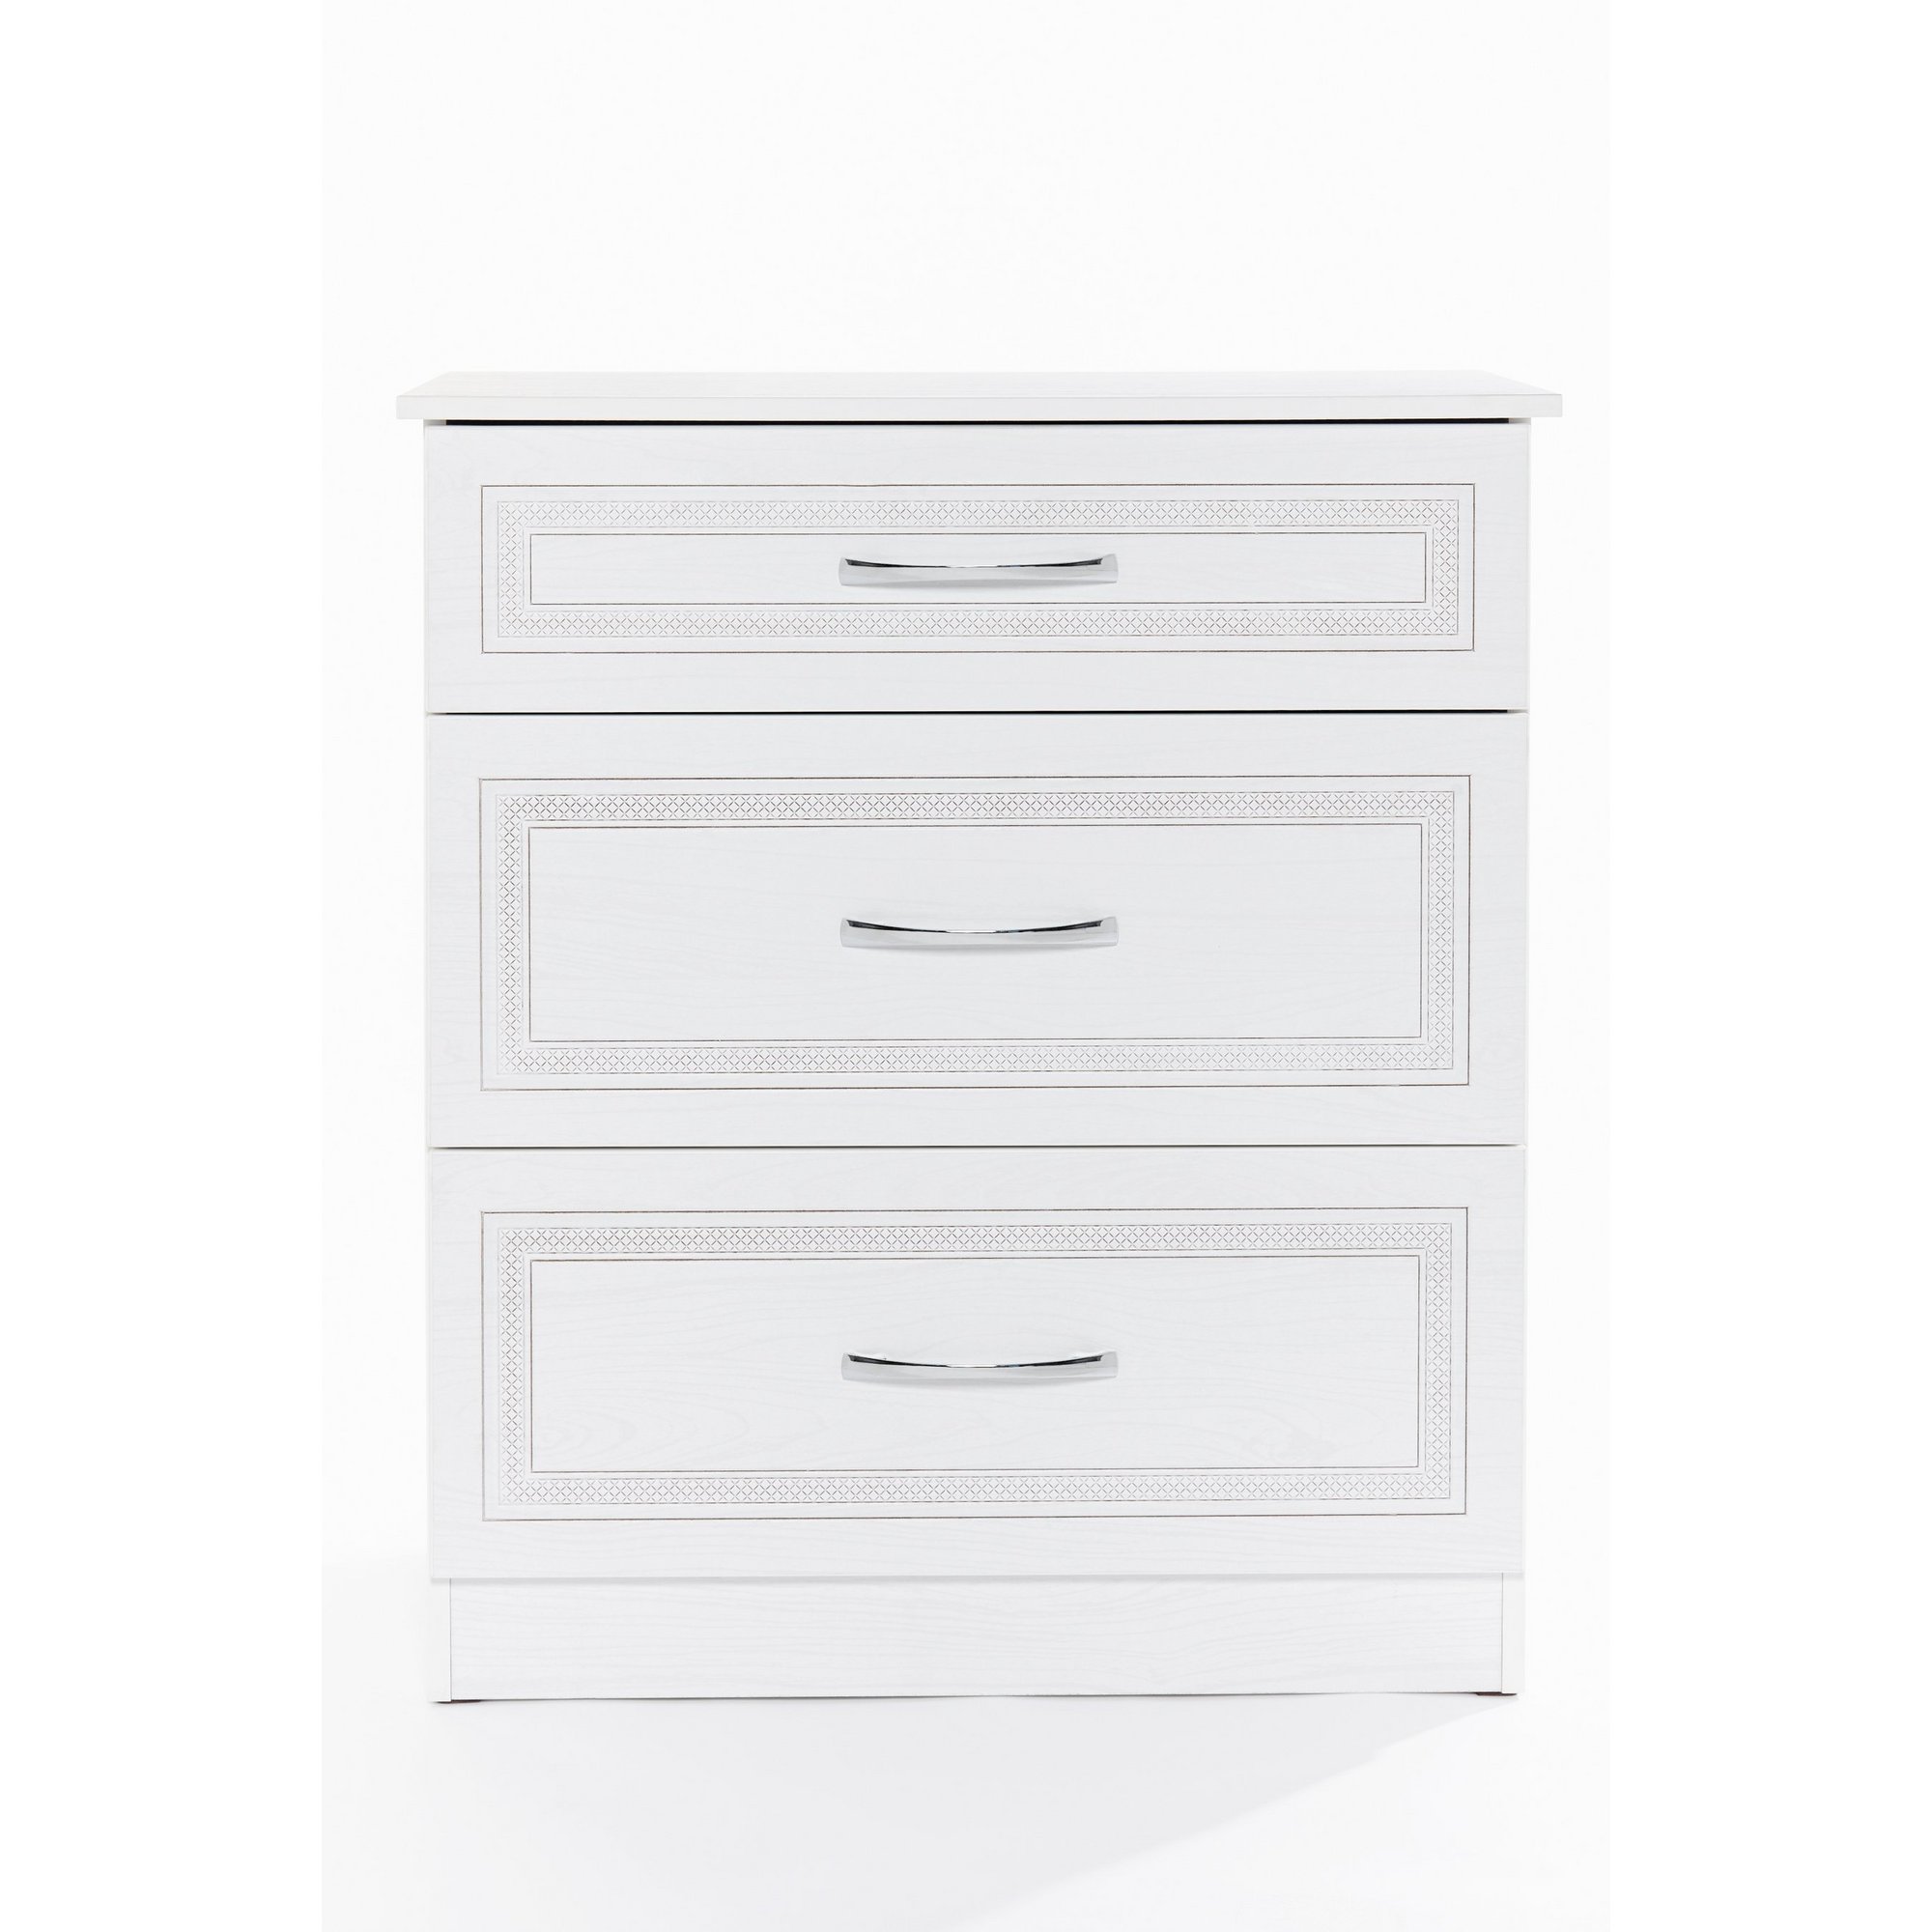 Image of Dorset 3 Drawer Ready Assembled Chest of Drawers